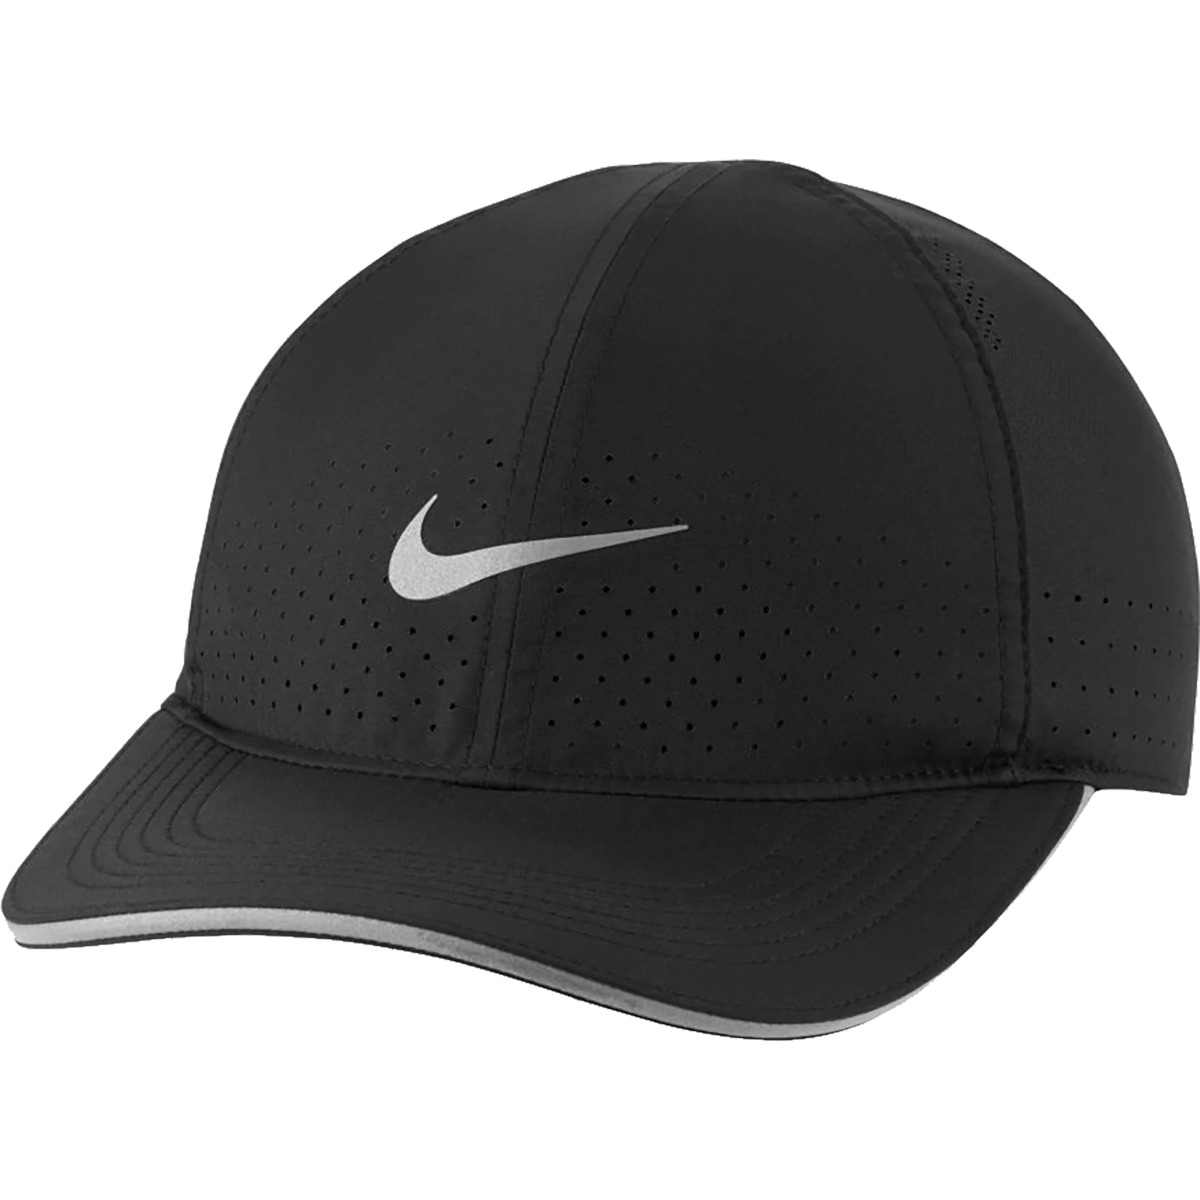 Nike Dri-FIT Aerobill Tailwind Cap, , large image number null